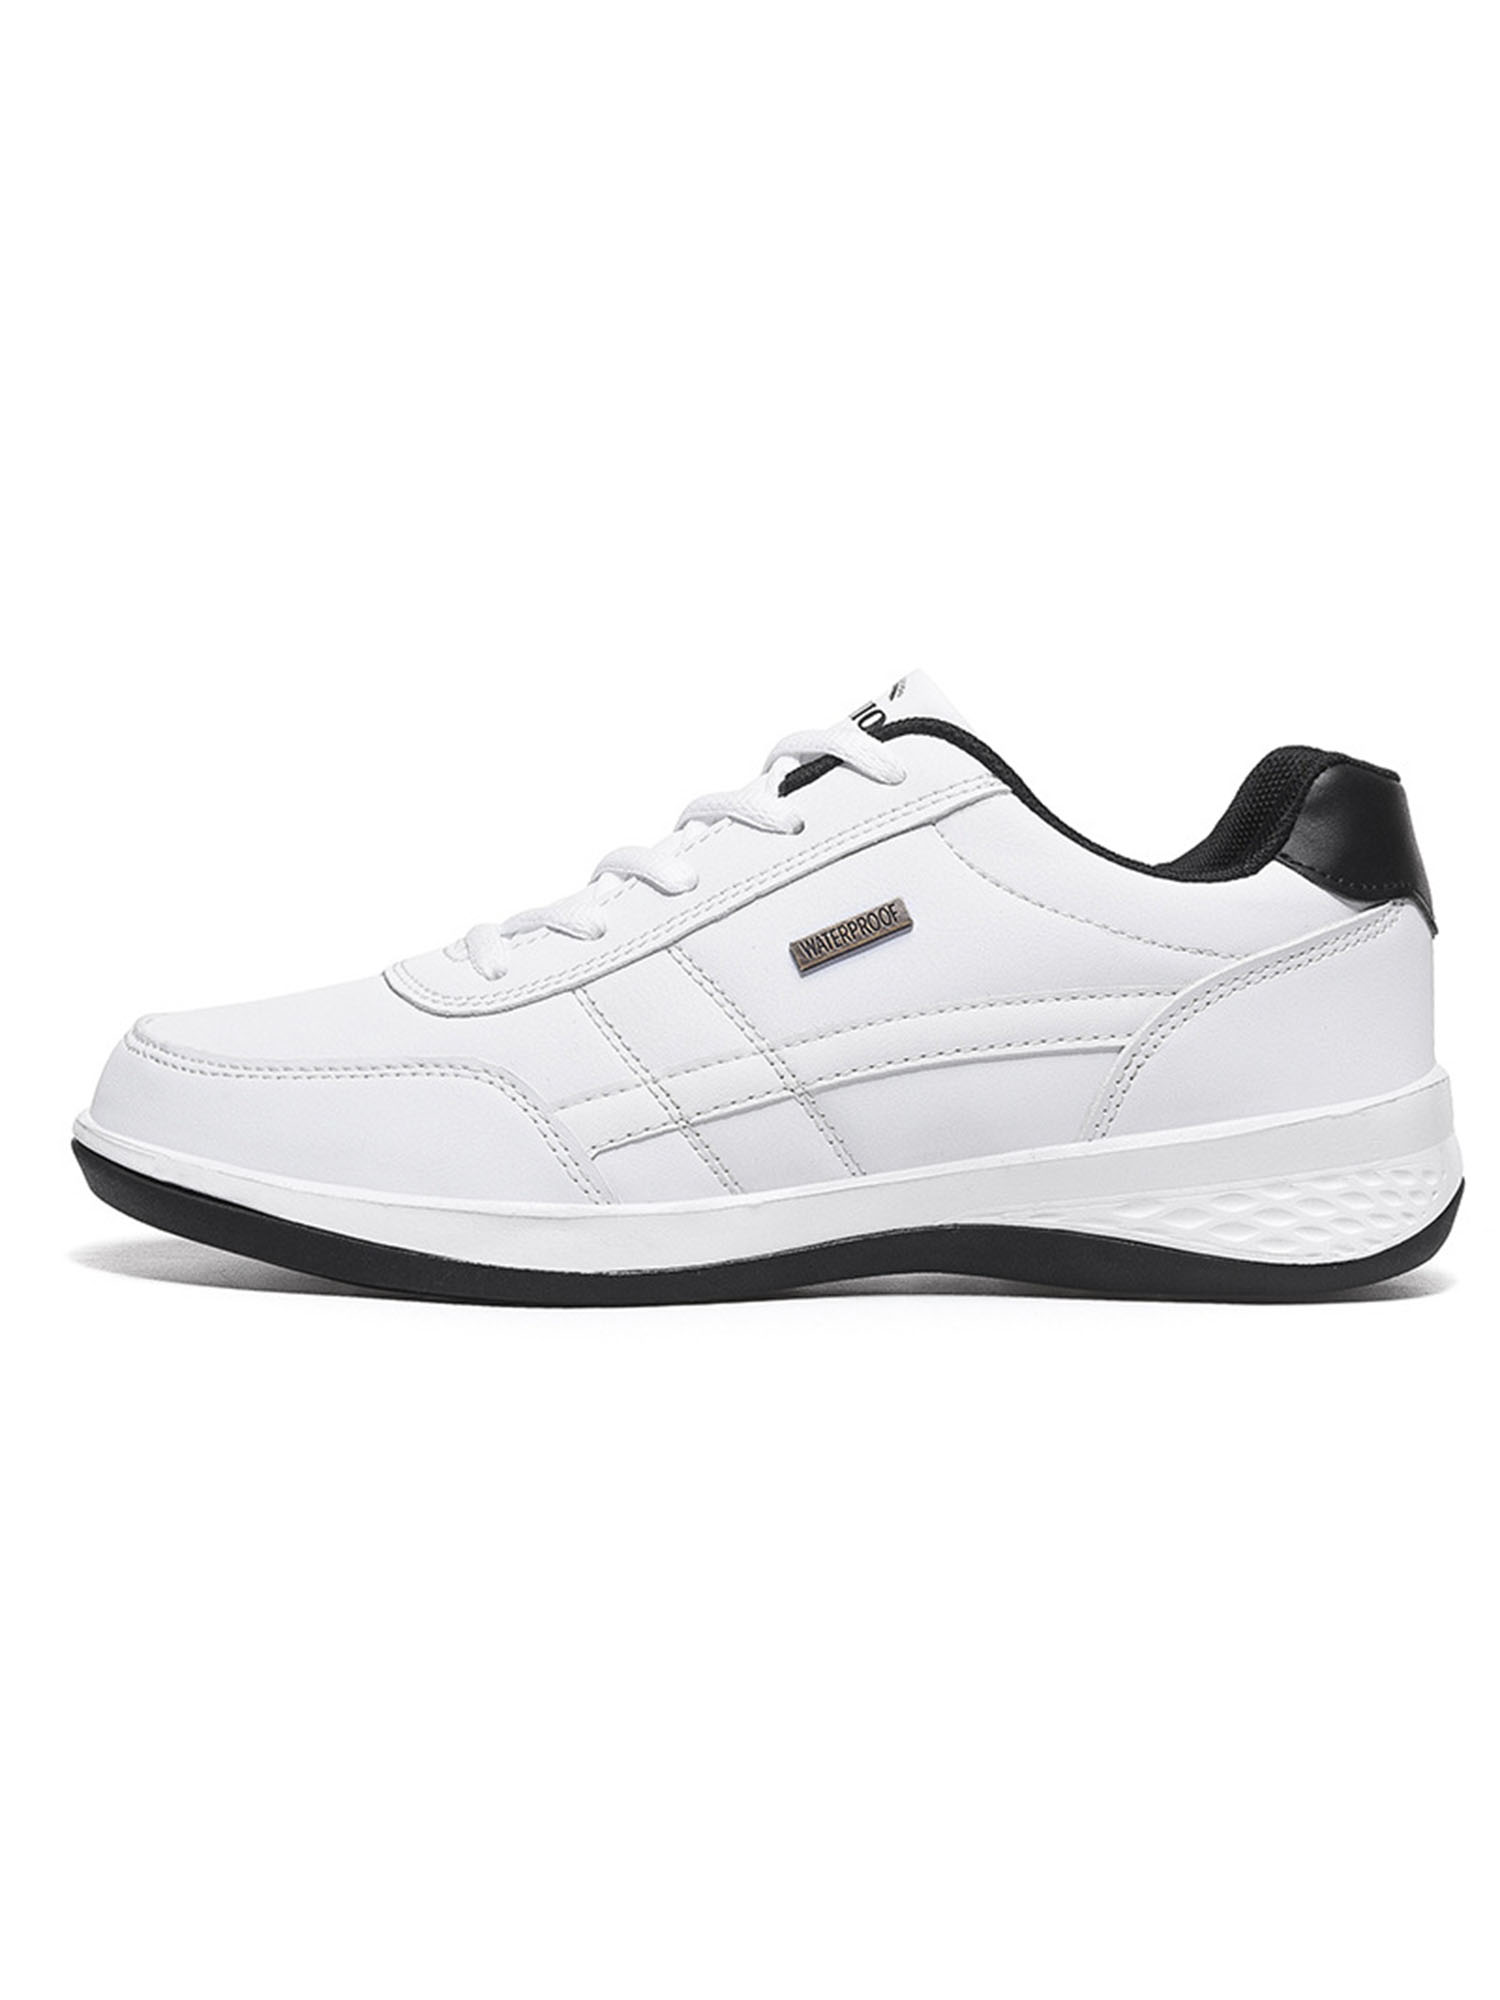 Avamo Casual Sneakers Men's Athletic Running Trainers Sports Tennis Fitness Shoes Gym White US 12 1 Pair - image 3 of 5